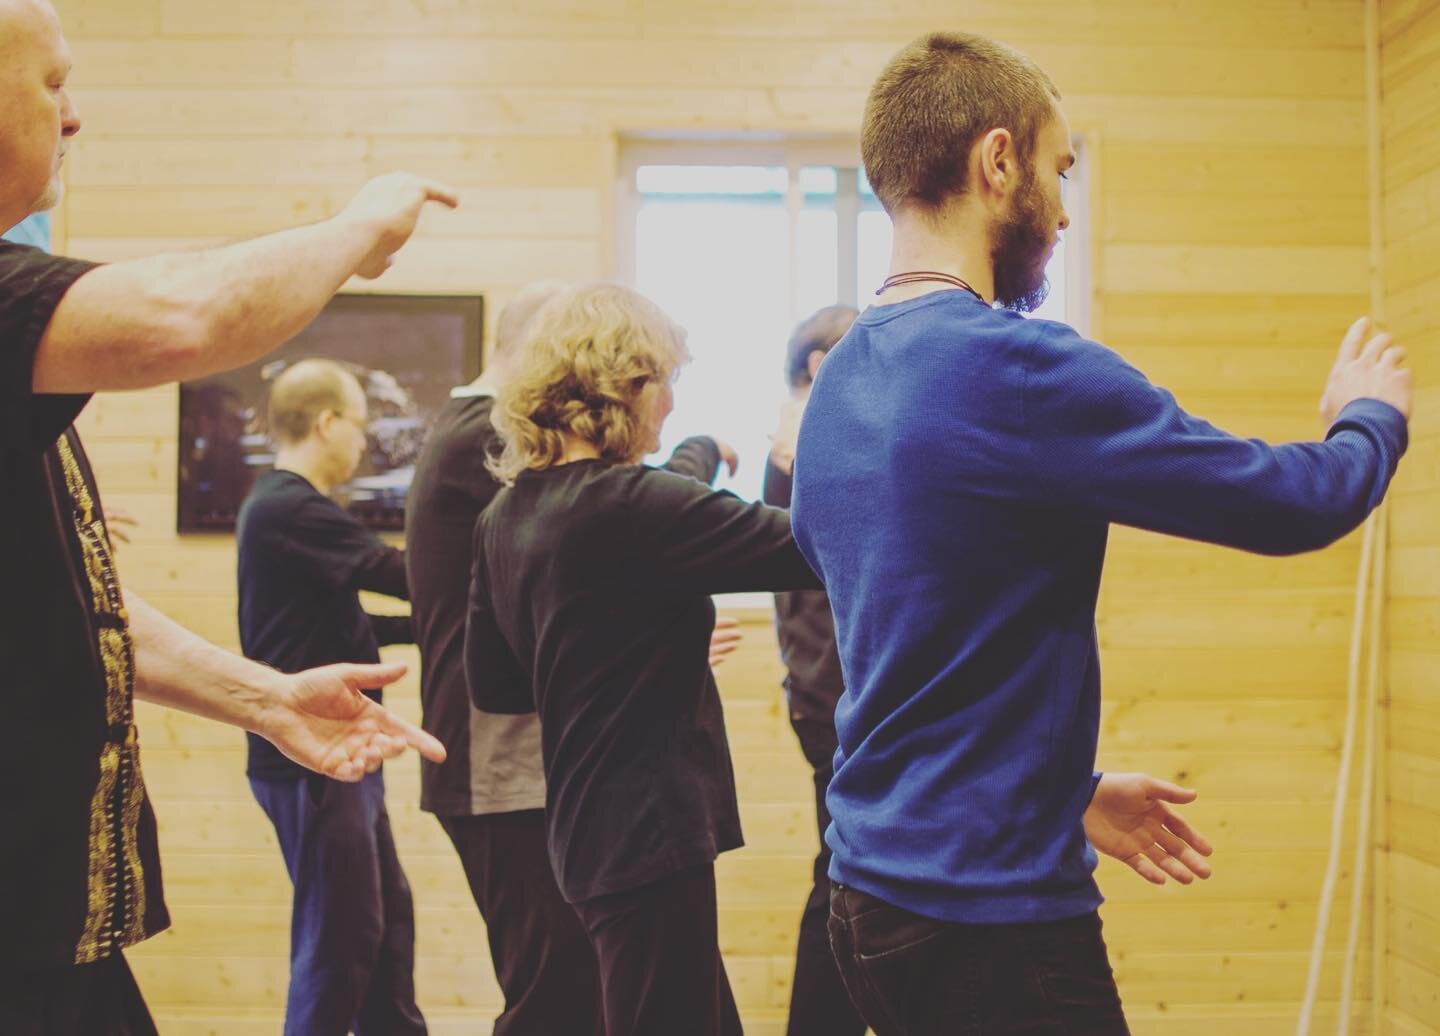 Did ya know we're the home of a traditional tai chi school? #twodragonstaichi

Our Beginner Program starts only twice per year and one is coming up soon!
-
&bull;Improve mindfulness
&bull;Reduce pain and stiffness
&bull;Improve cognitive function
&bu